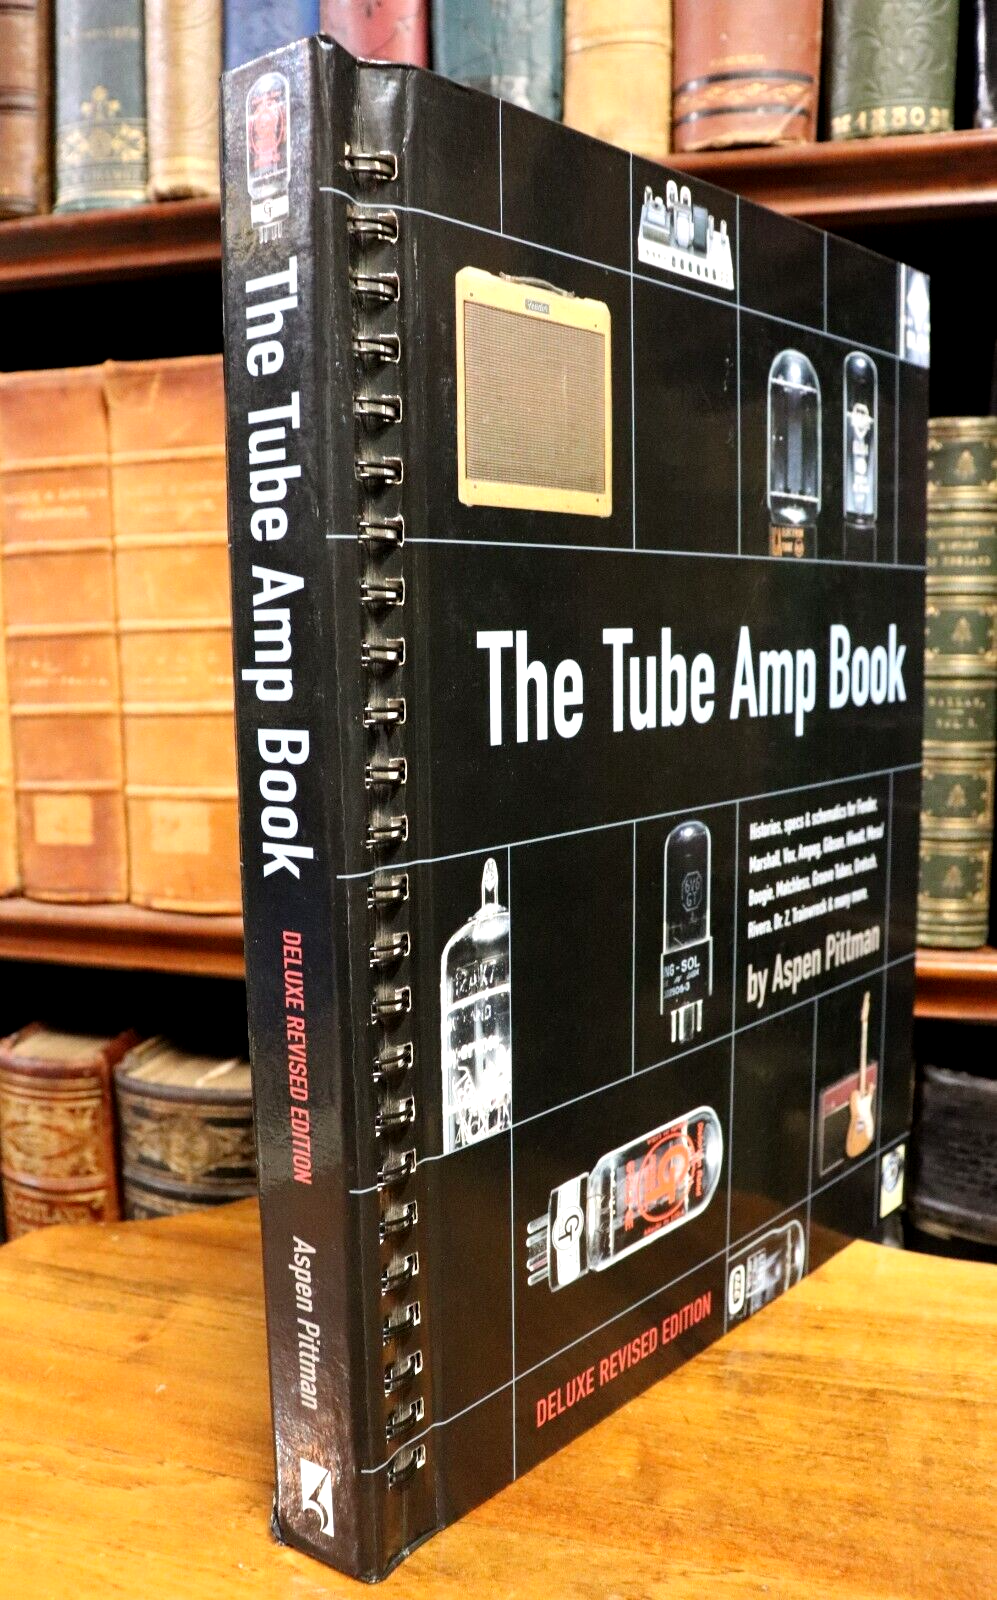 The Tube Amp Book by Aspen Pittman - 2007 - Guitar Amplifier Reference Book - 0